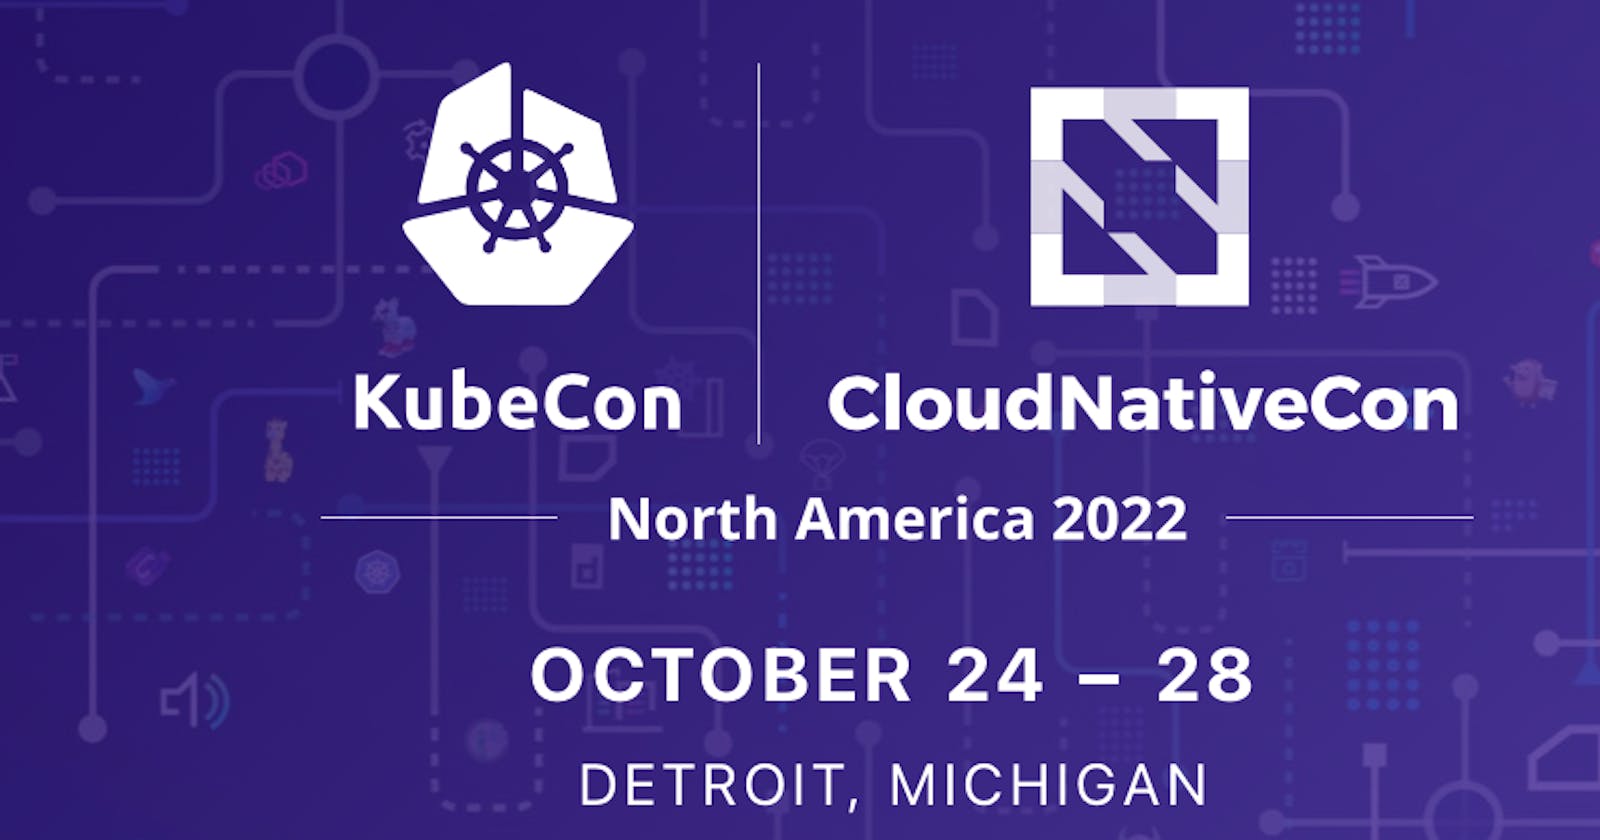 My First Kubecon And CloudNativeCon Event Experience